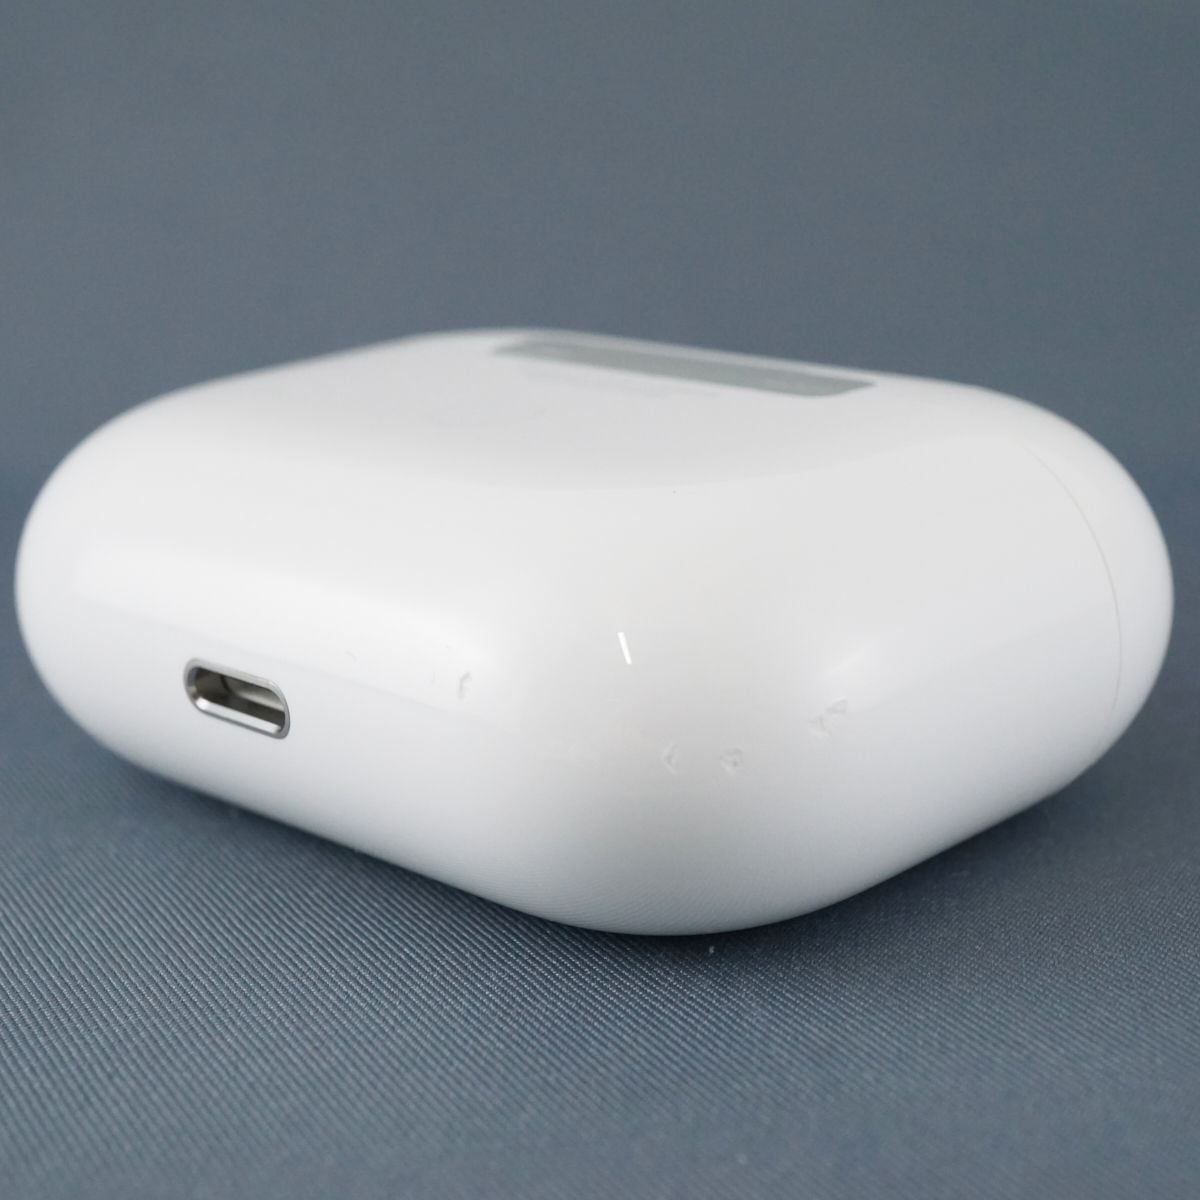 airpodspro美品 AirPods Pro 第一世代 両耳 充電器ケース - イヤフォン